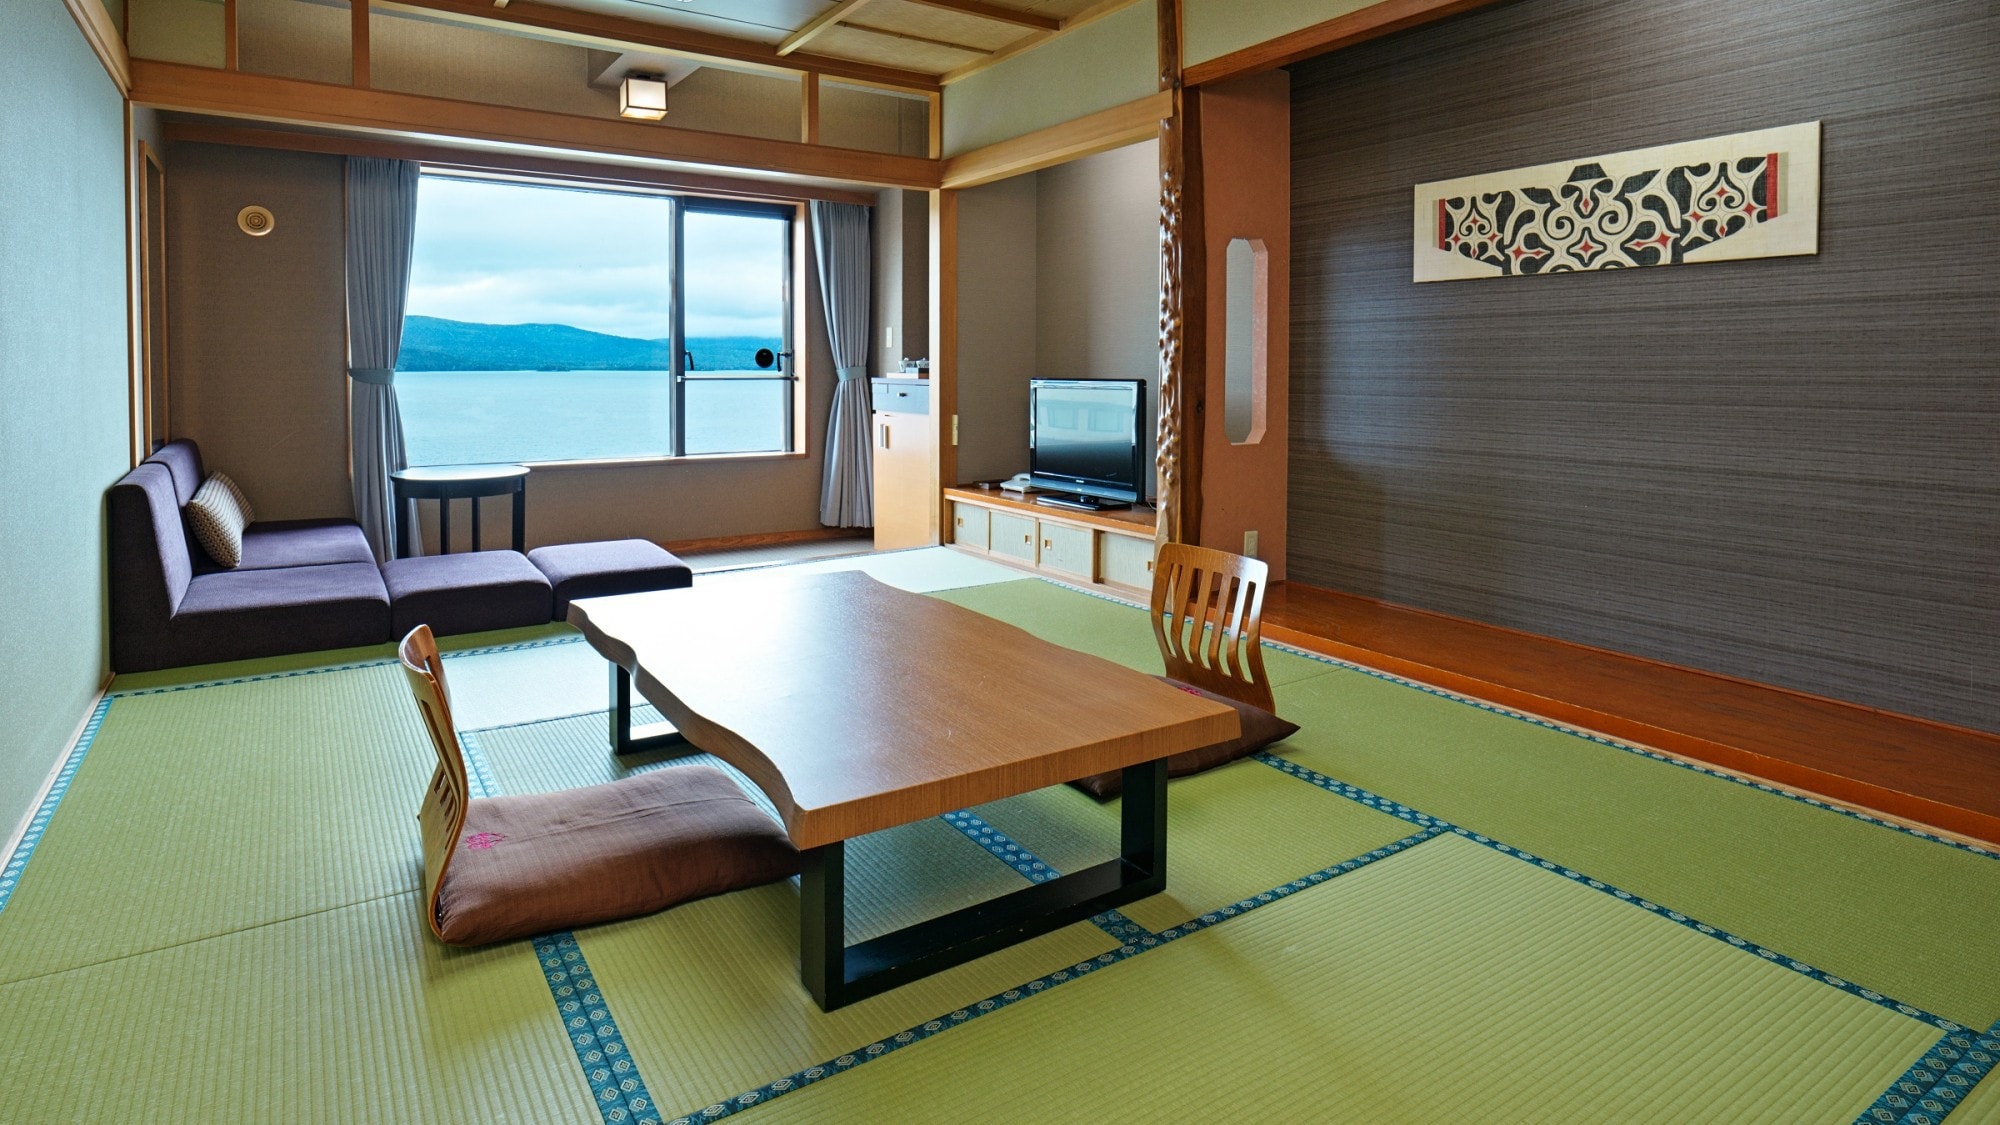 [Lake side] Japanese-style room / Japanese-style room where you can spend comfortably while feeling the Japanese atmosphere